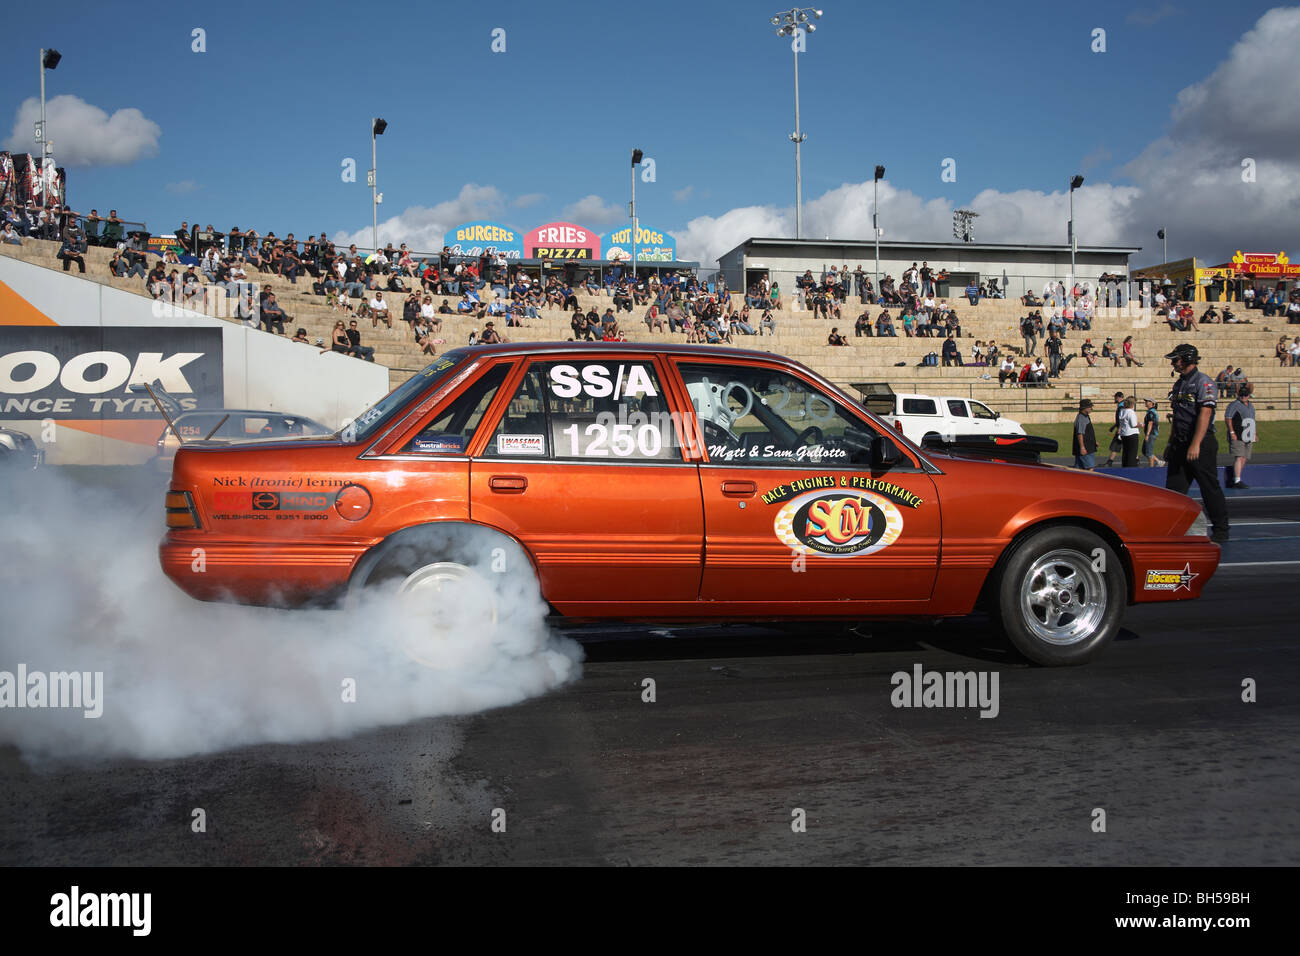 Australian Holden Commodore drag racing car performing a burnout to warm the rear tyres before racing Stock Photo